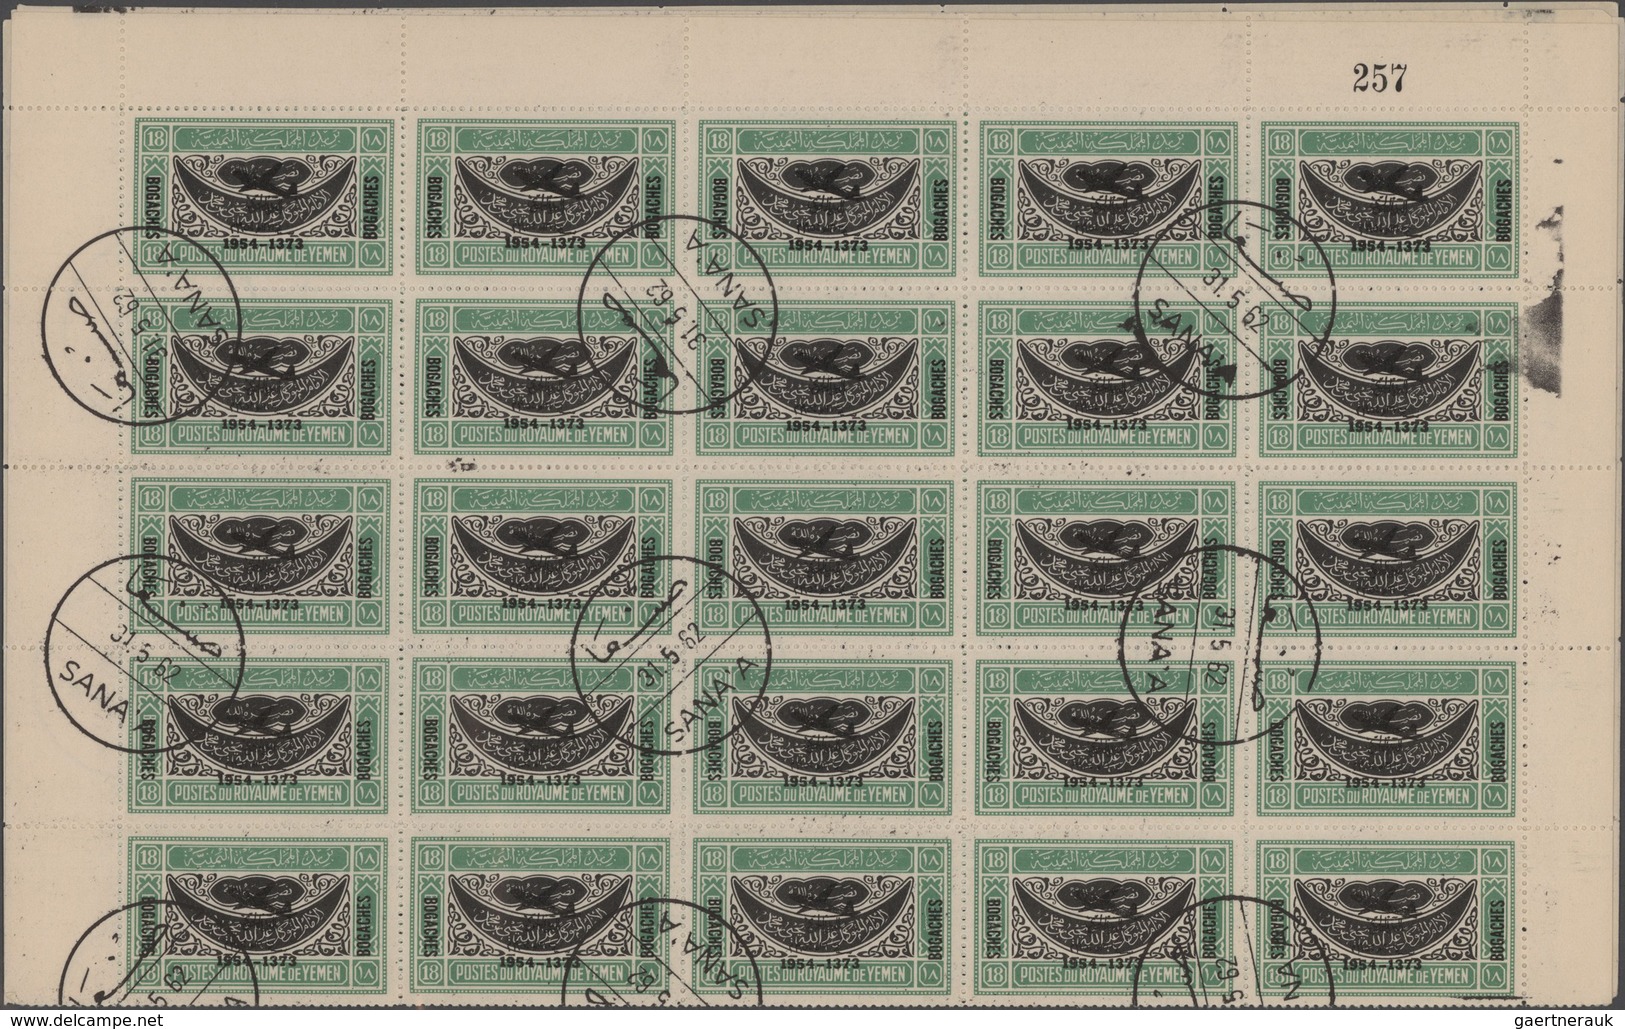 Jemen: 1954, Provisionals, stock of the overprint "airplane, year dates and currency", eight differe